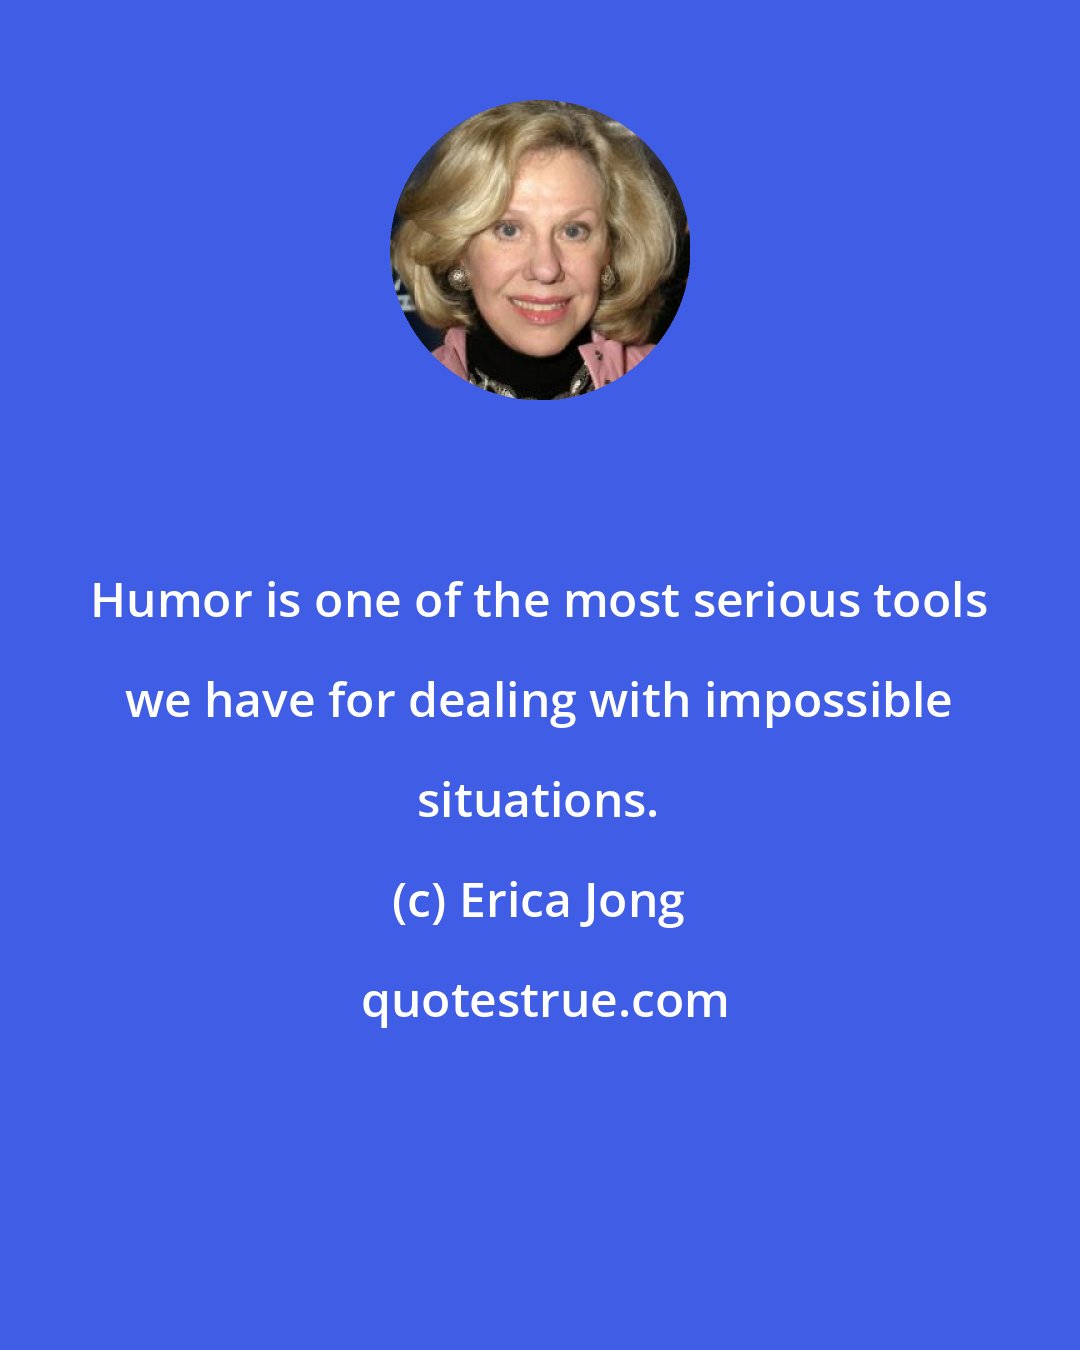 Erica Jong: Humor is one of the most serious tools we have for dealing with impossible situations.